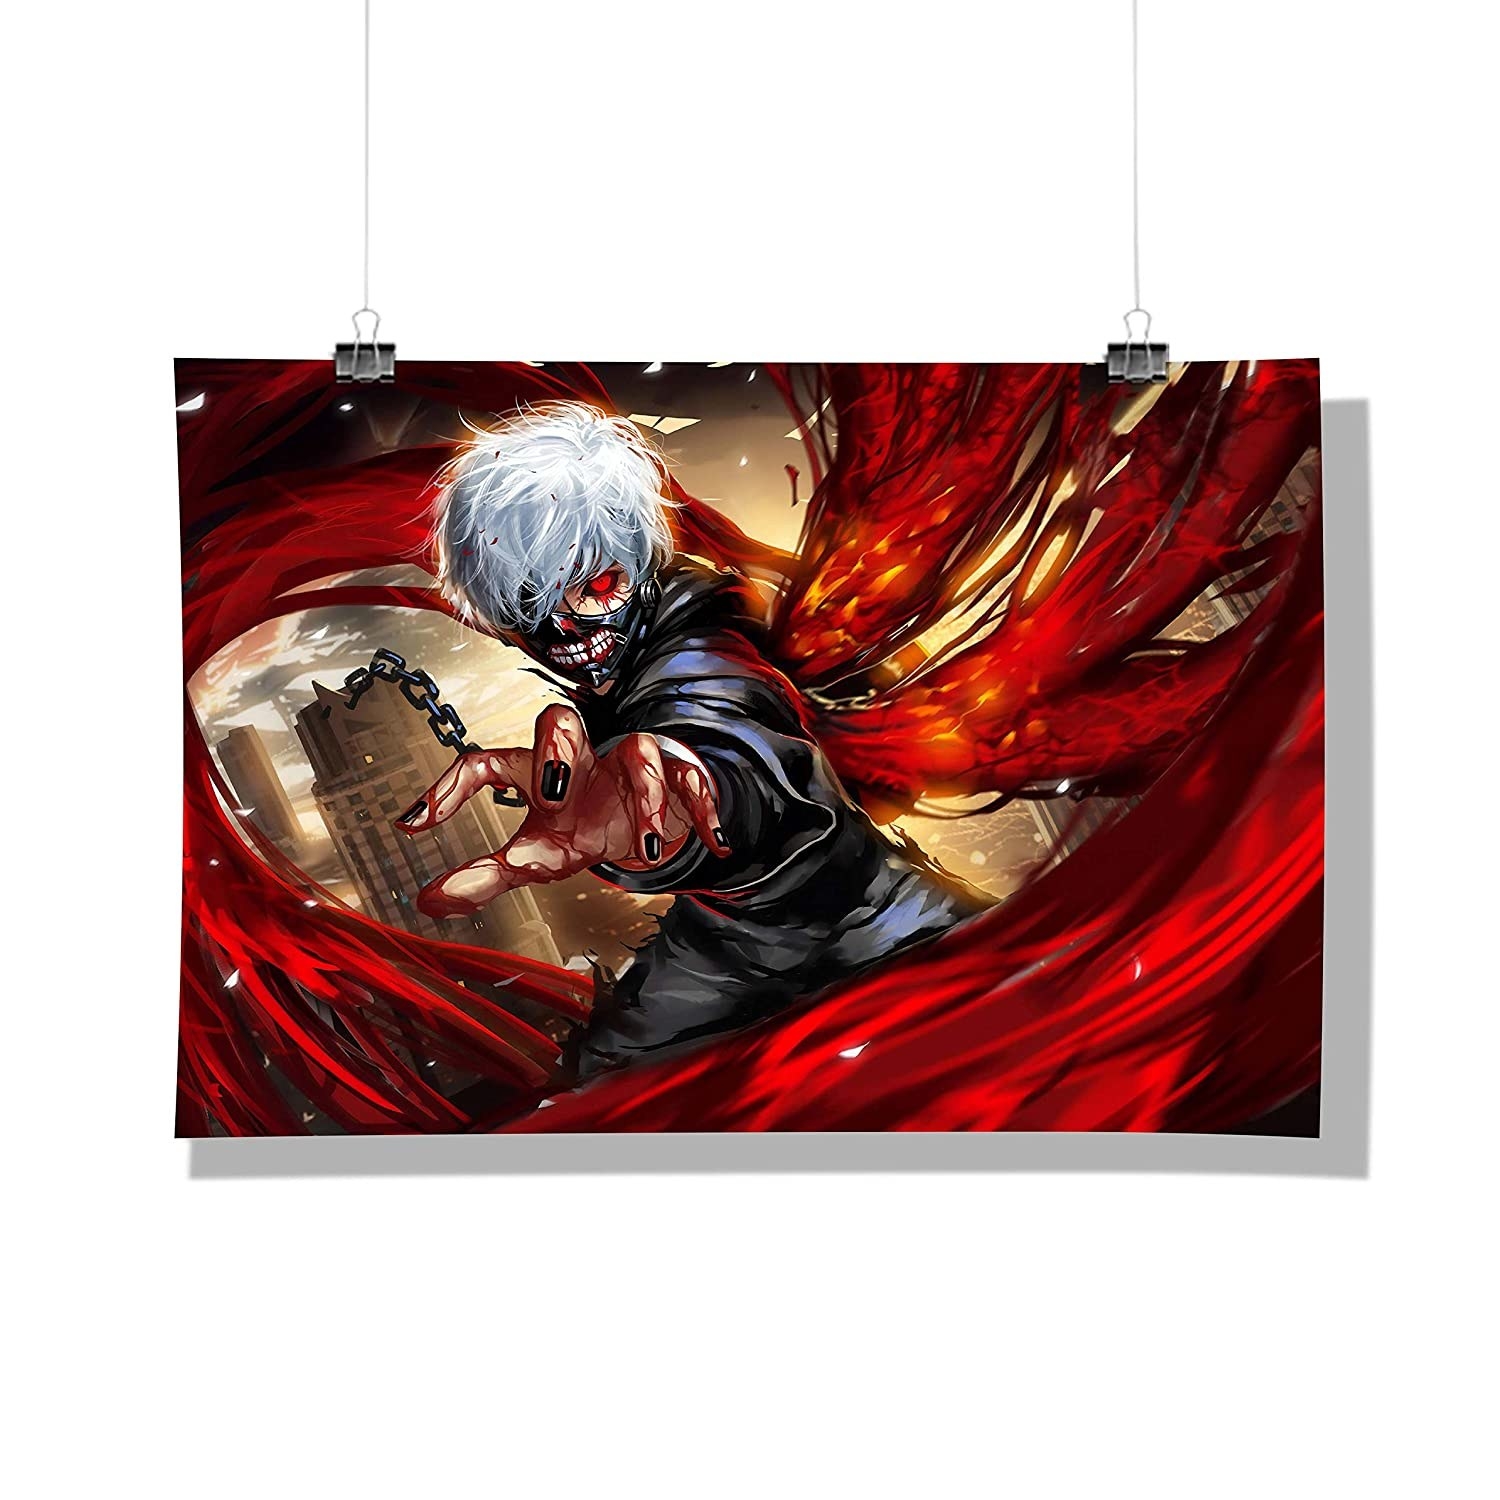 A Tokyo Ghoul poster with red, black and golden accents.